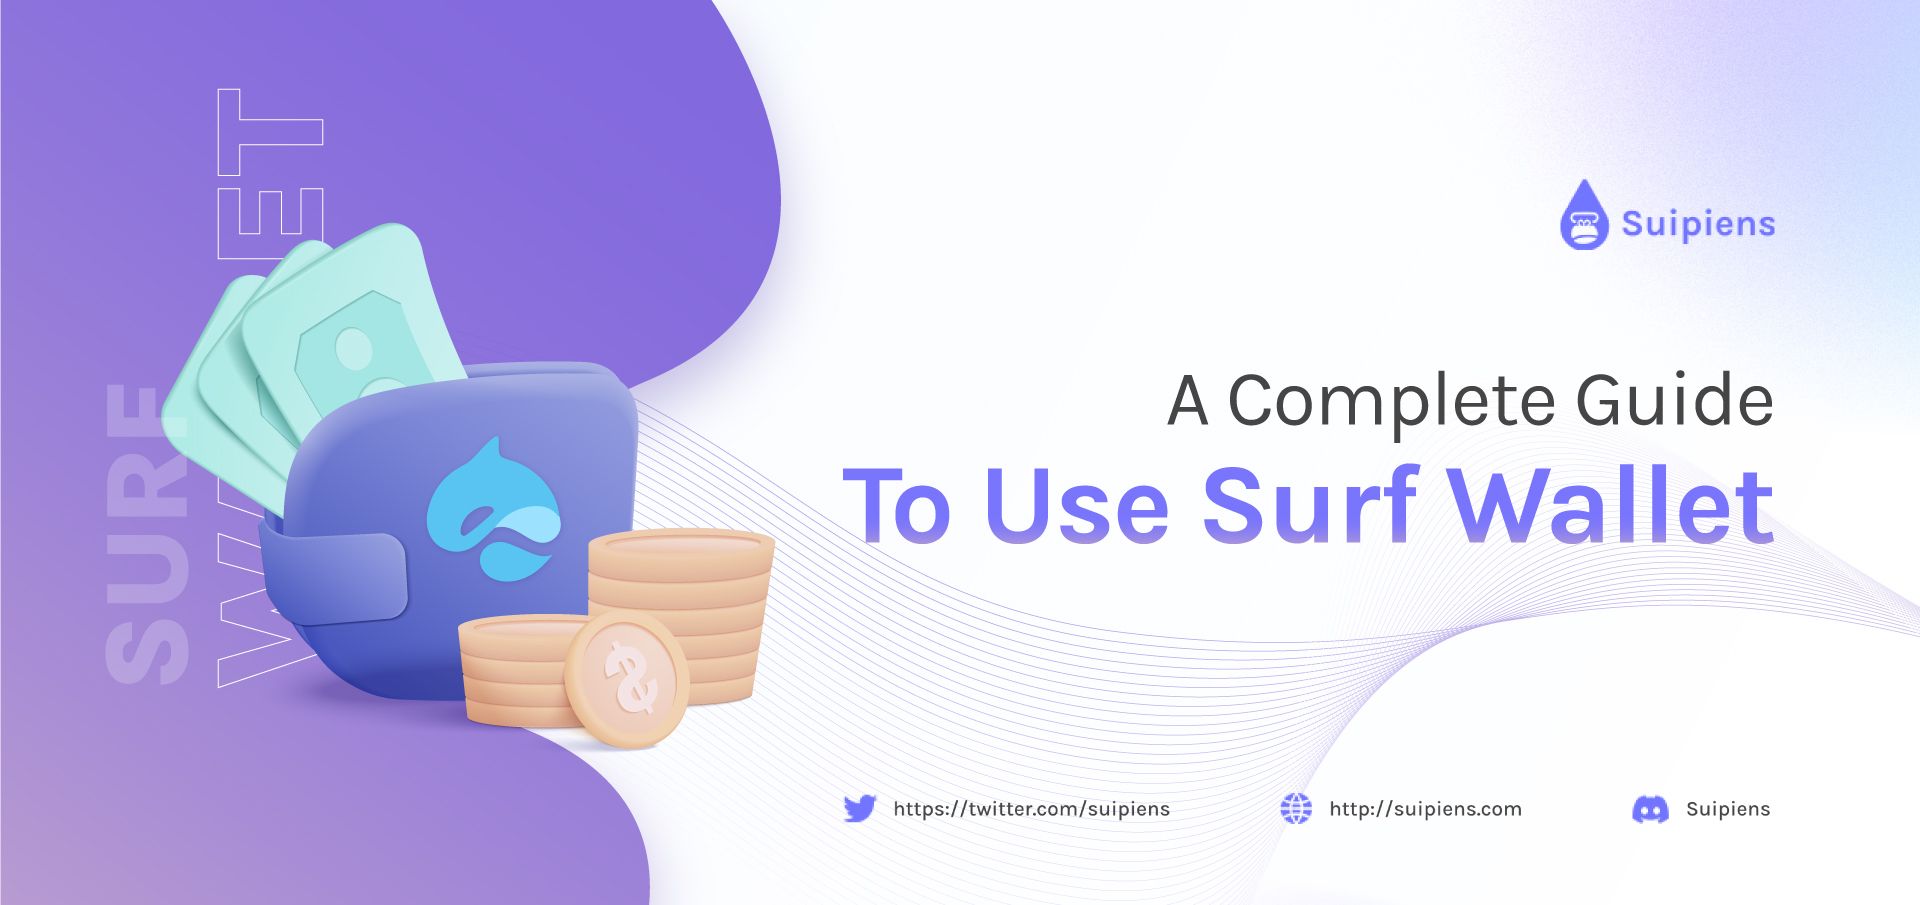 A Complete Guide To Use Surf Wallet